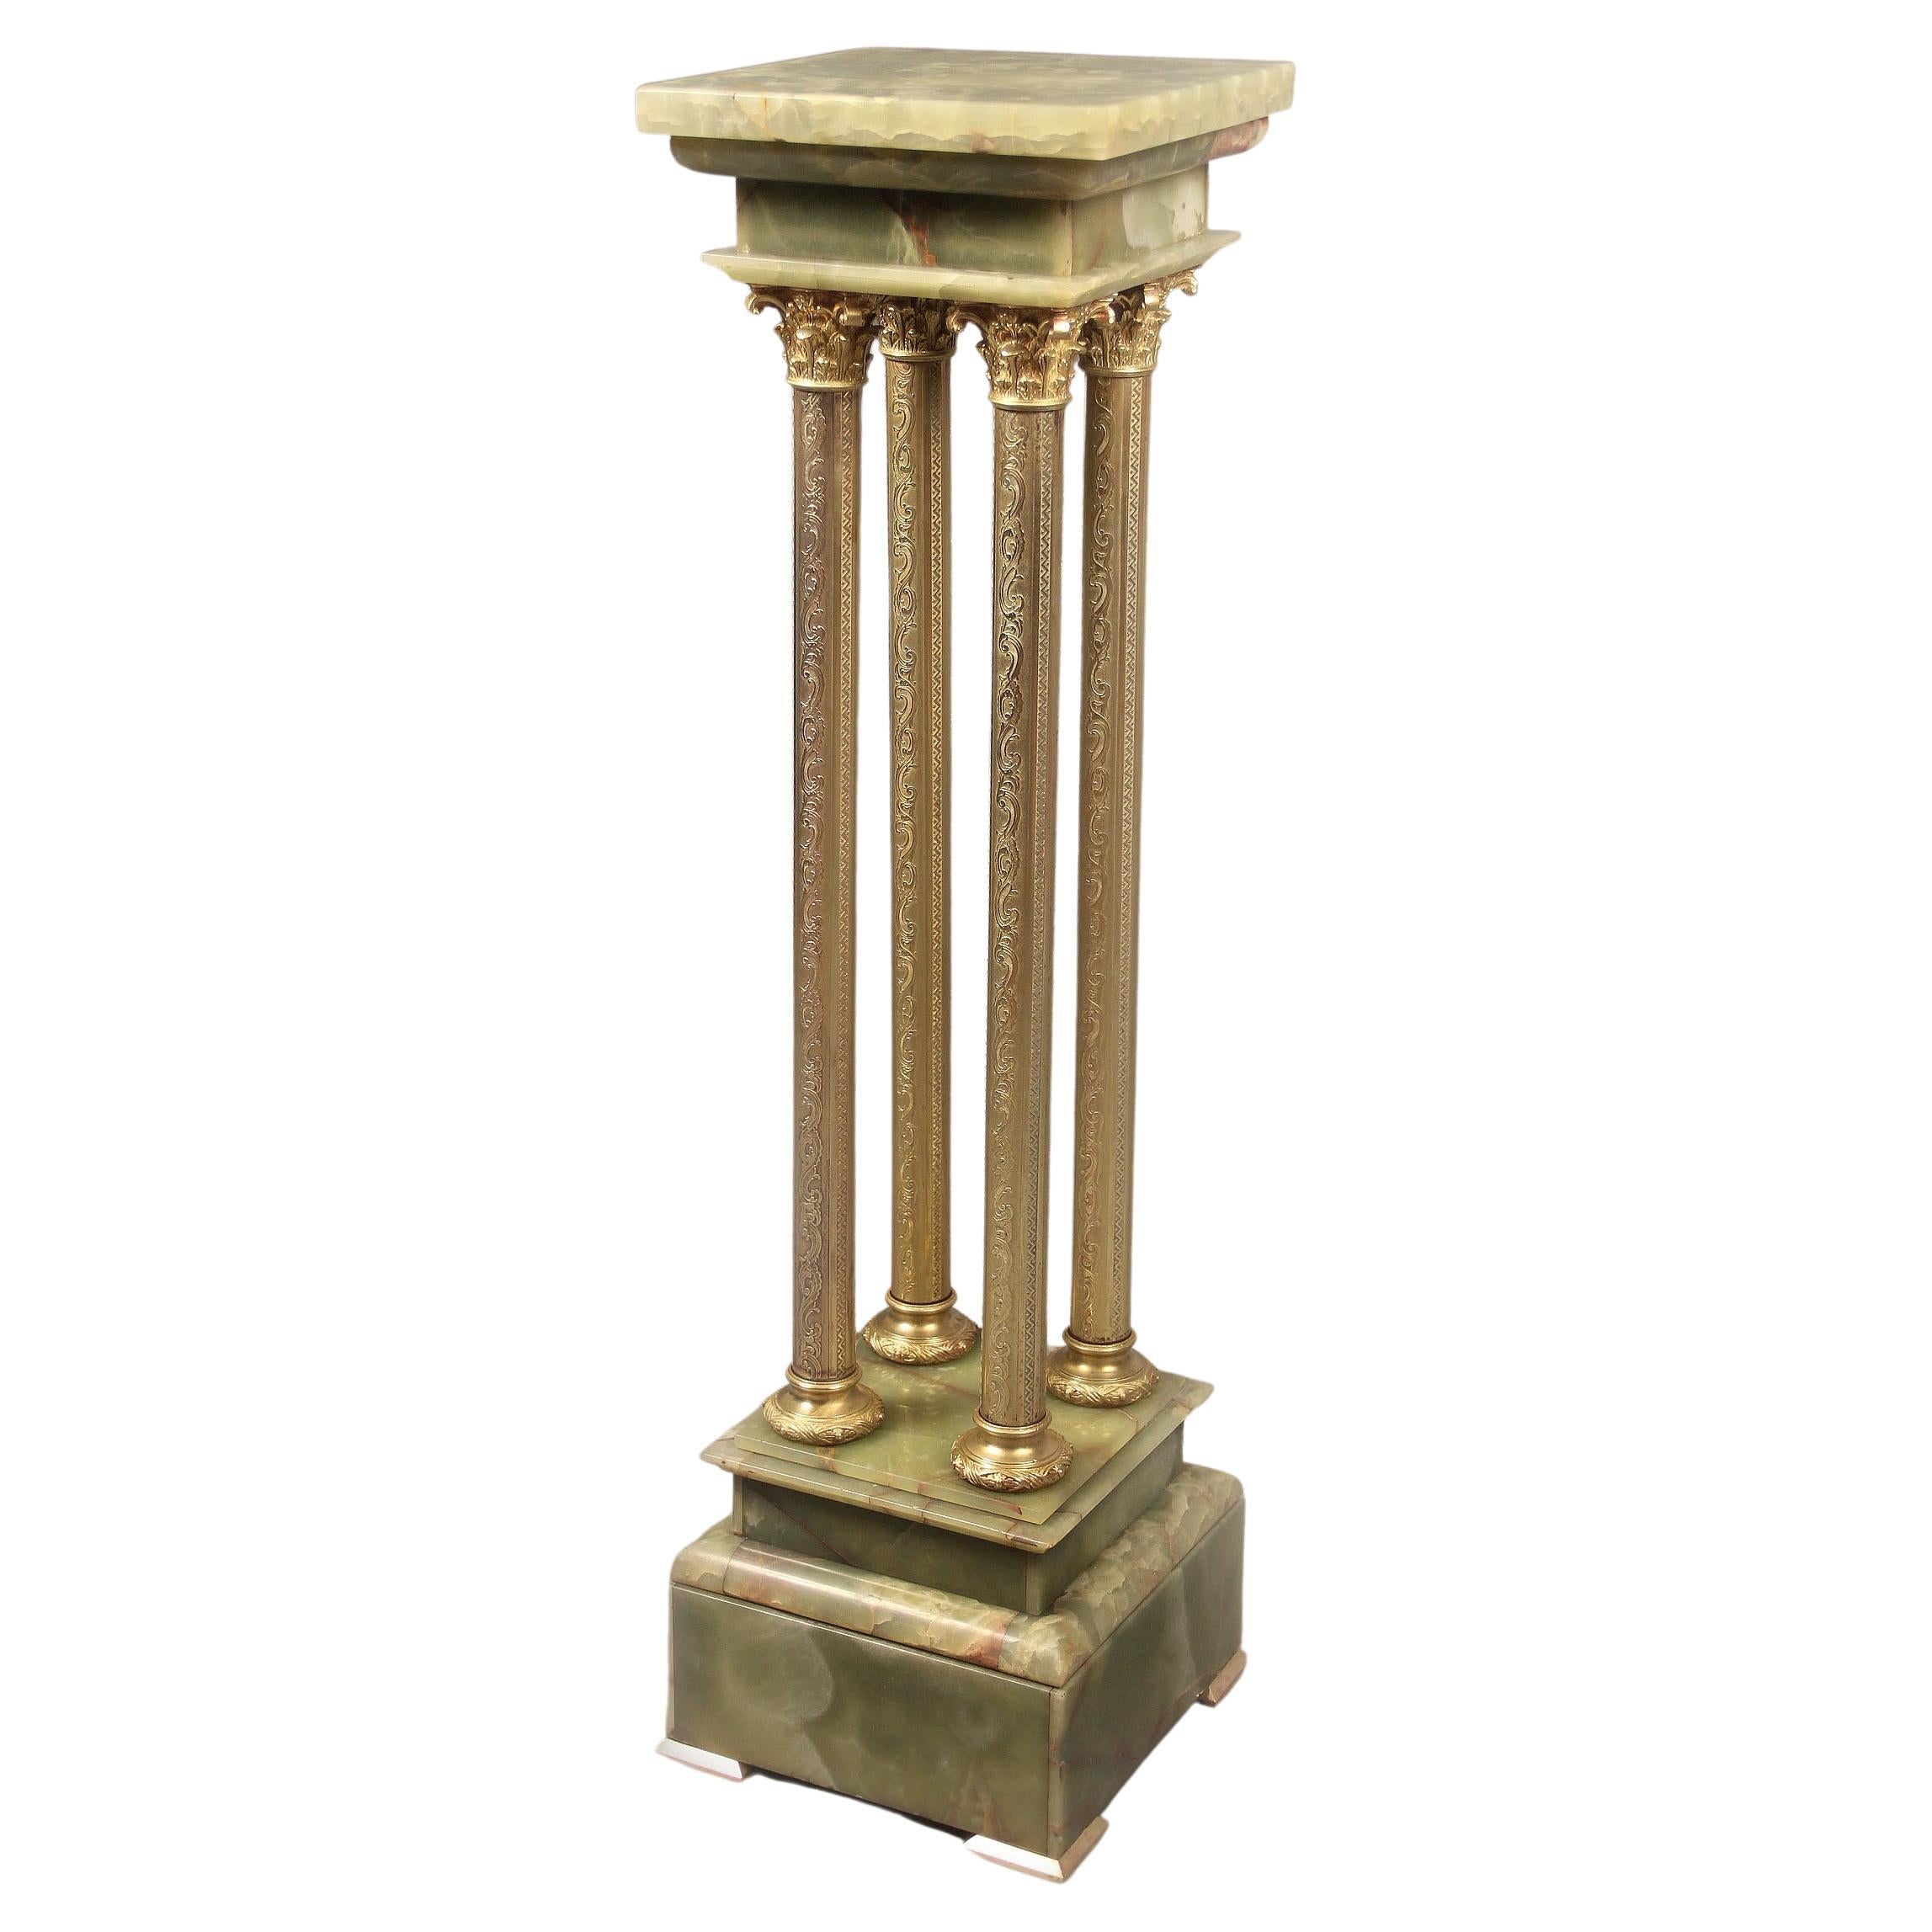 An Interesting Late 19th Century Gilt Bronze and Onyx Pedestal